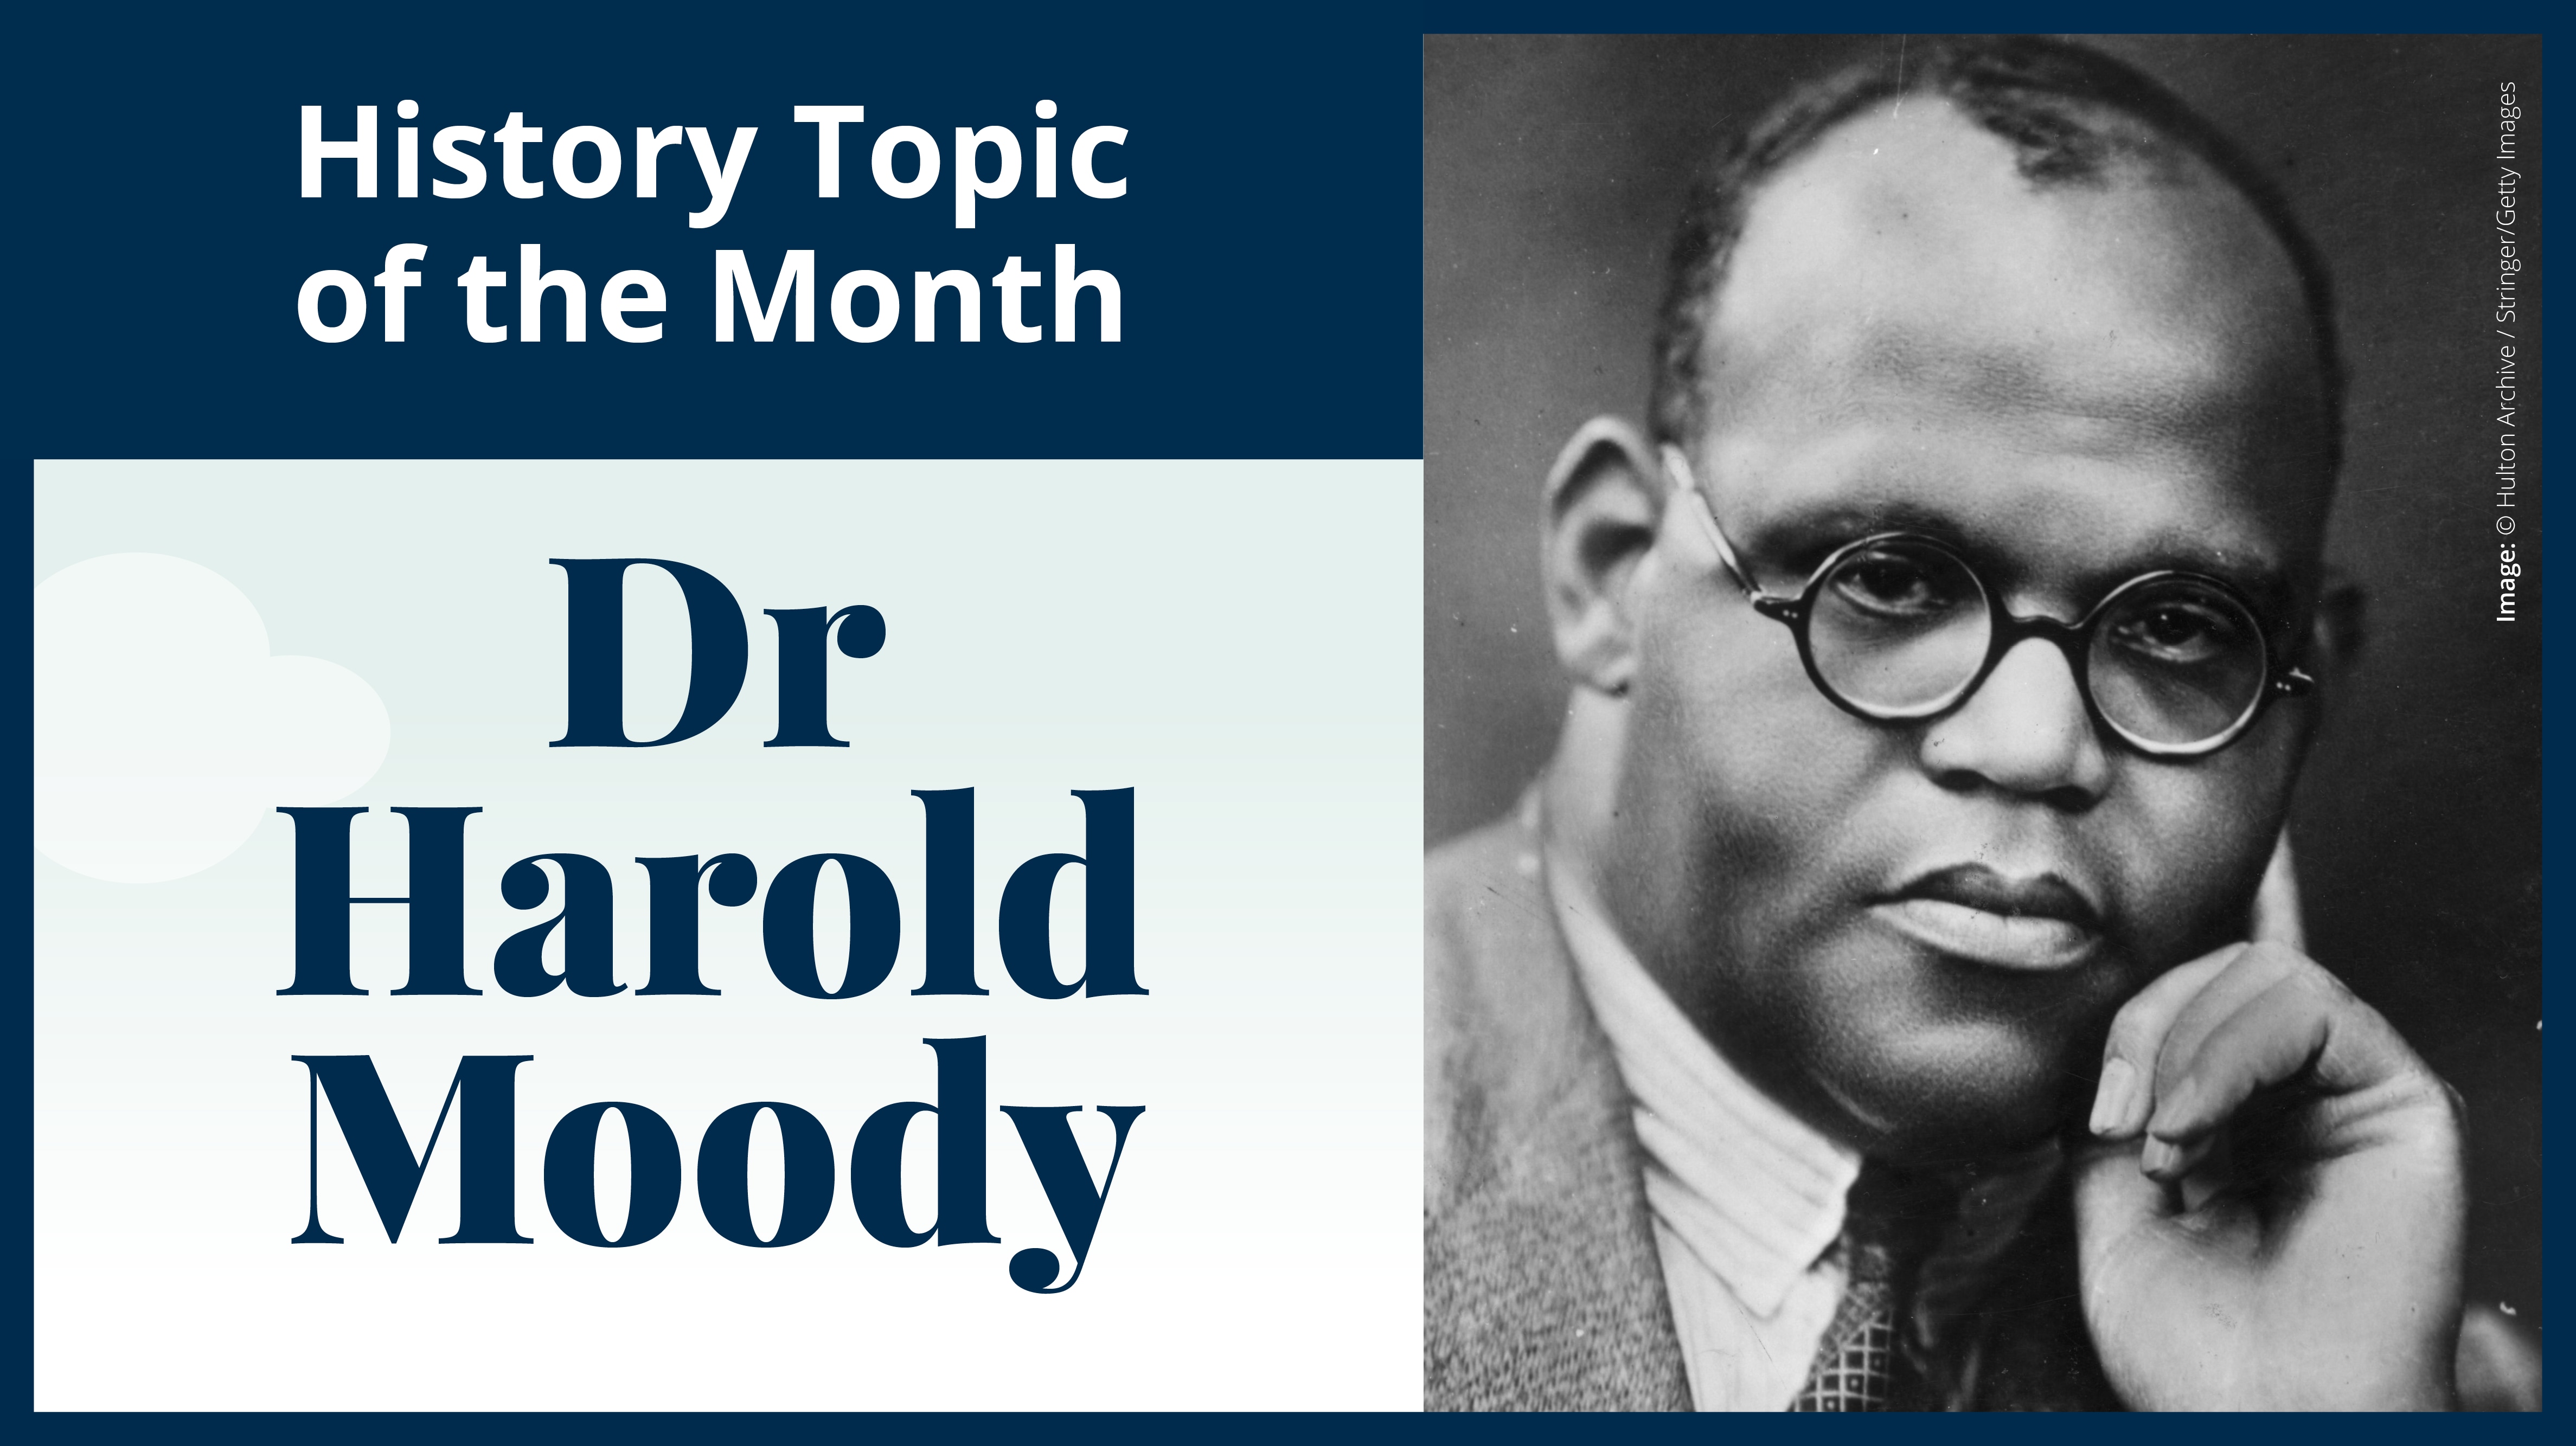 History topic of the month: Dr Harold Moody